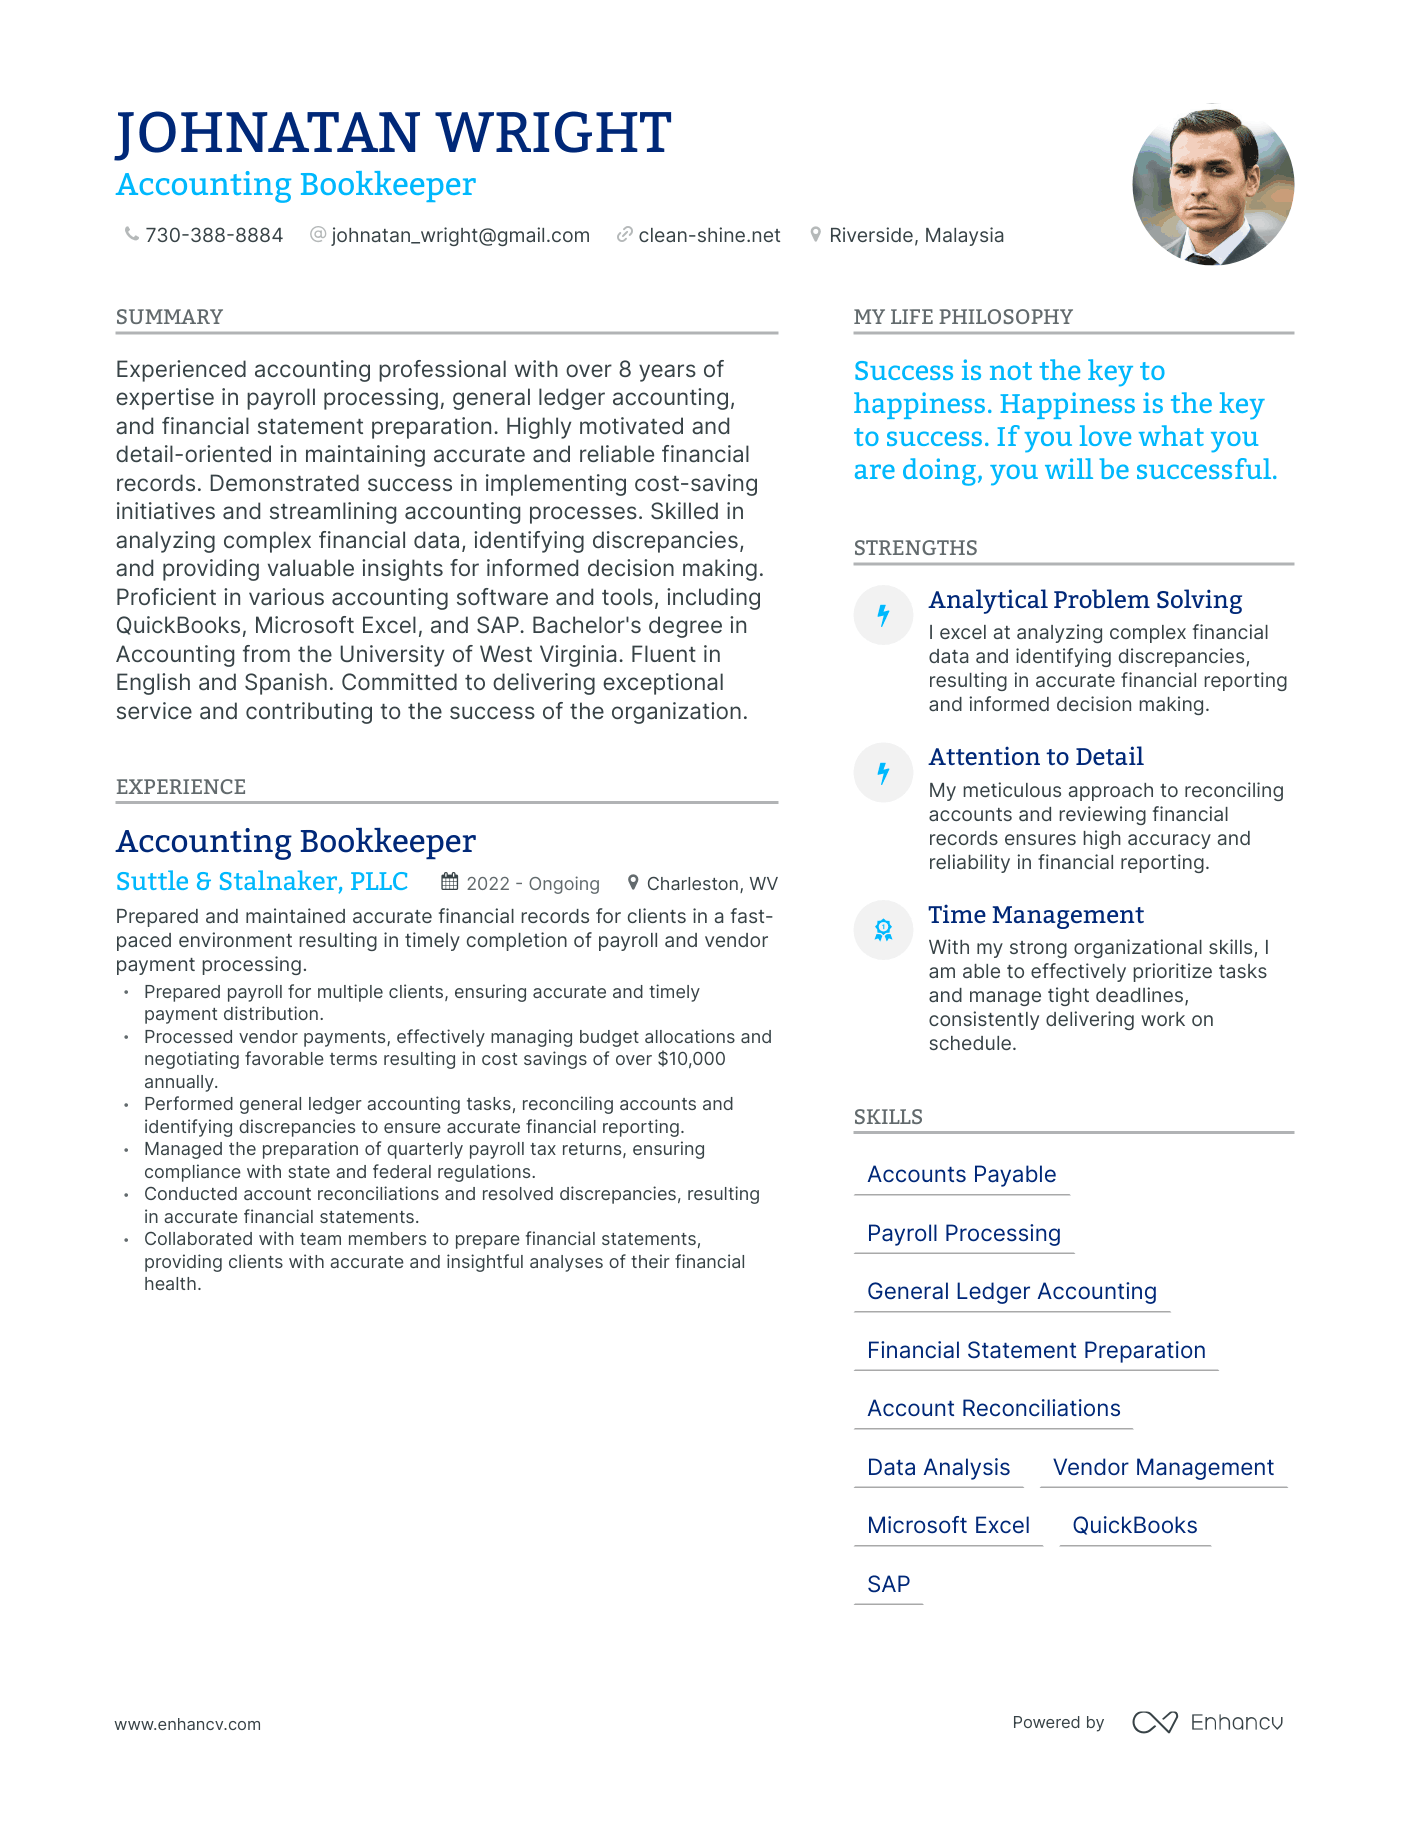 Accounting Bookkeeper resume example